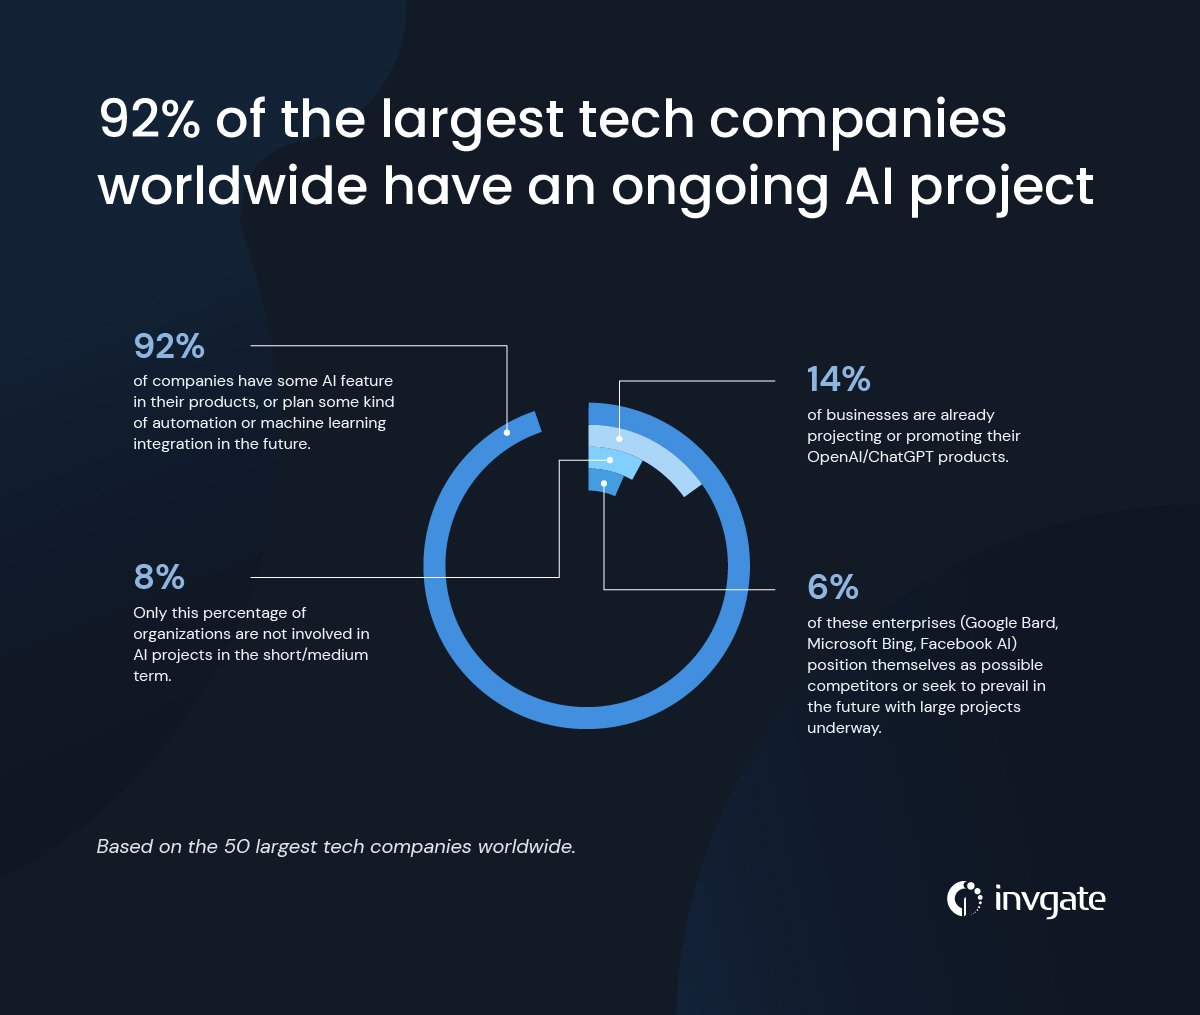 92% of the top tech companies worldwide already have AI integrations or are in the process of doing so.